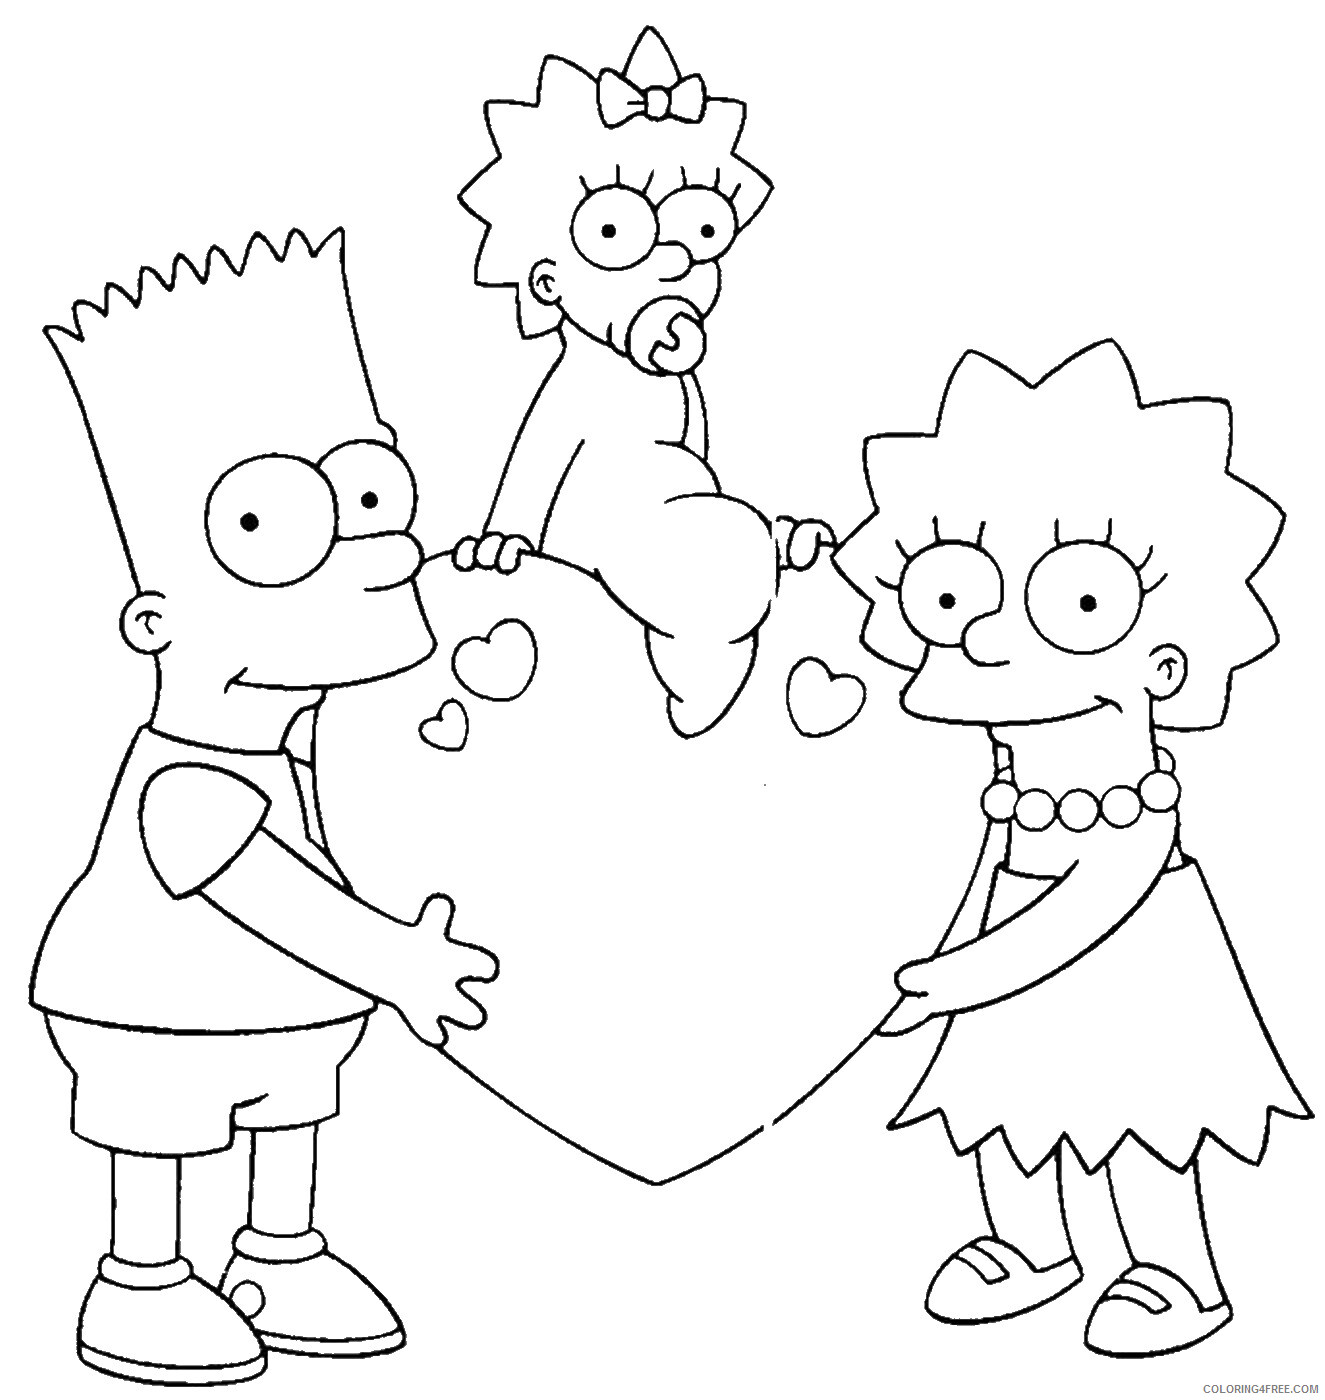 The Simpsons Coloring Pages TV Film simpson_cl_27 Printable 2020 09583 Coloring4free